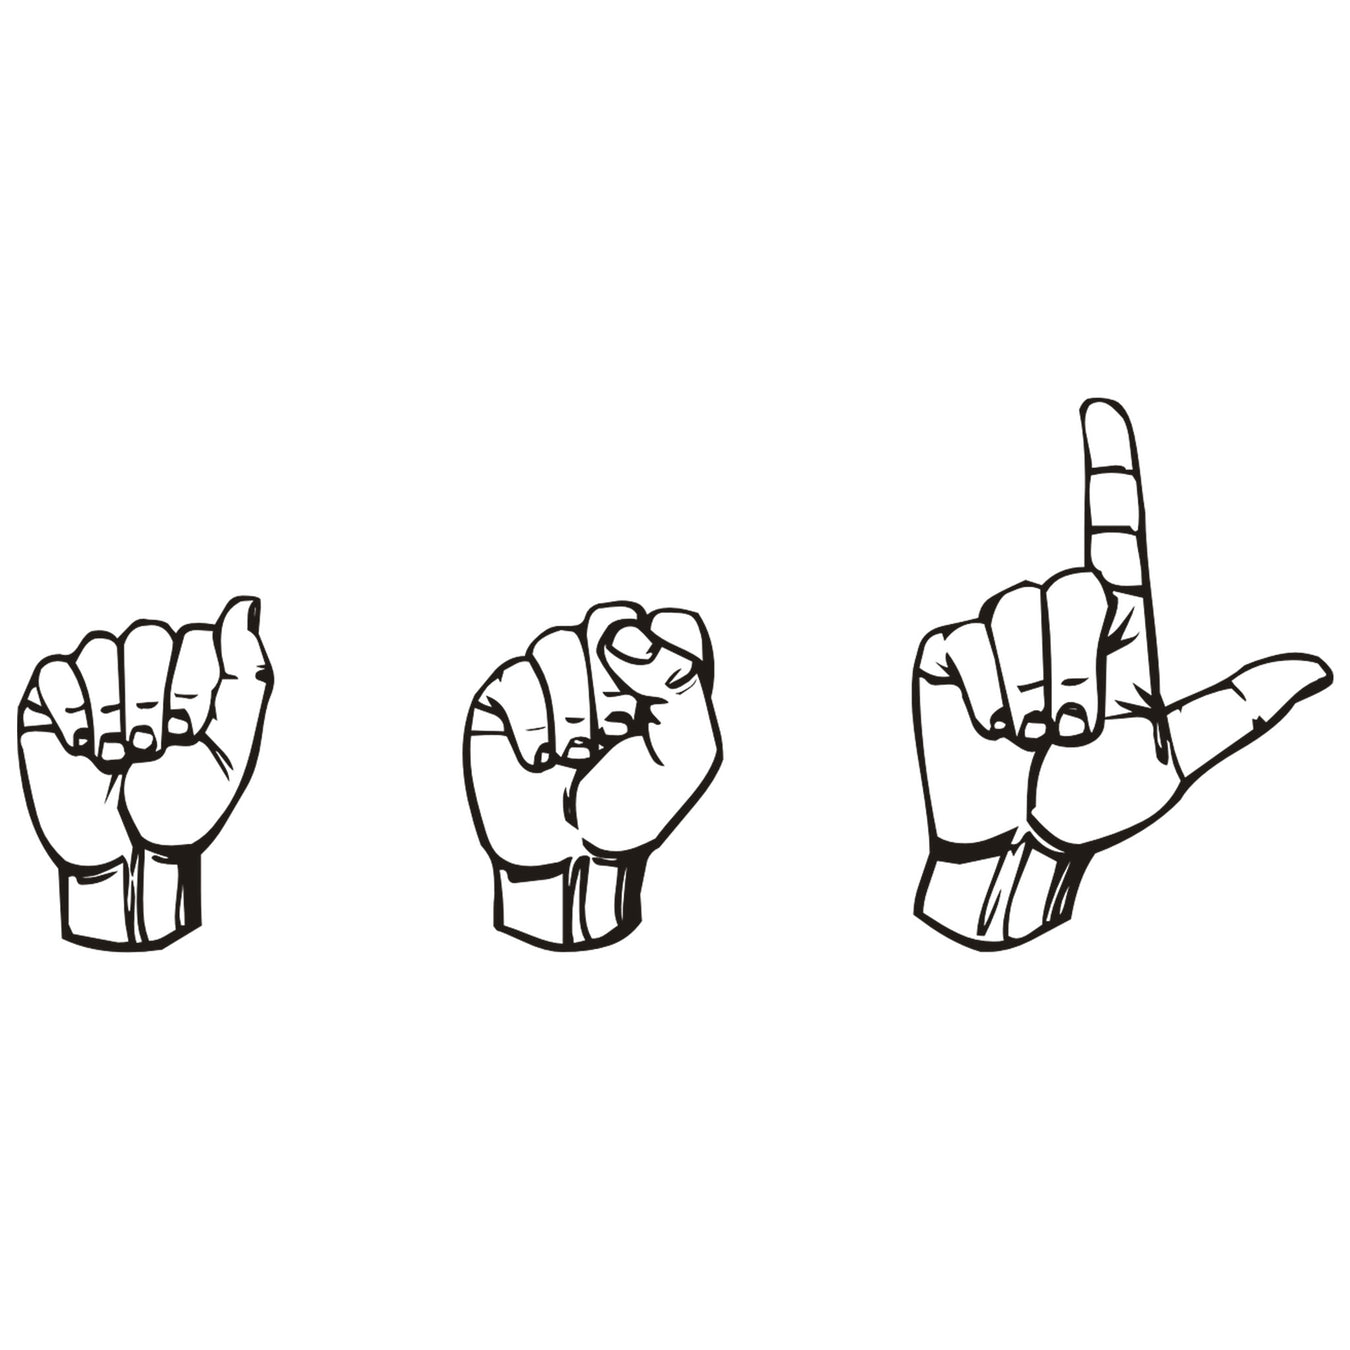 ASL spelt with hand gestures in American Sign Language.  ASL learning resources include student workbooks and game cards. 